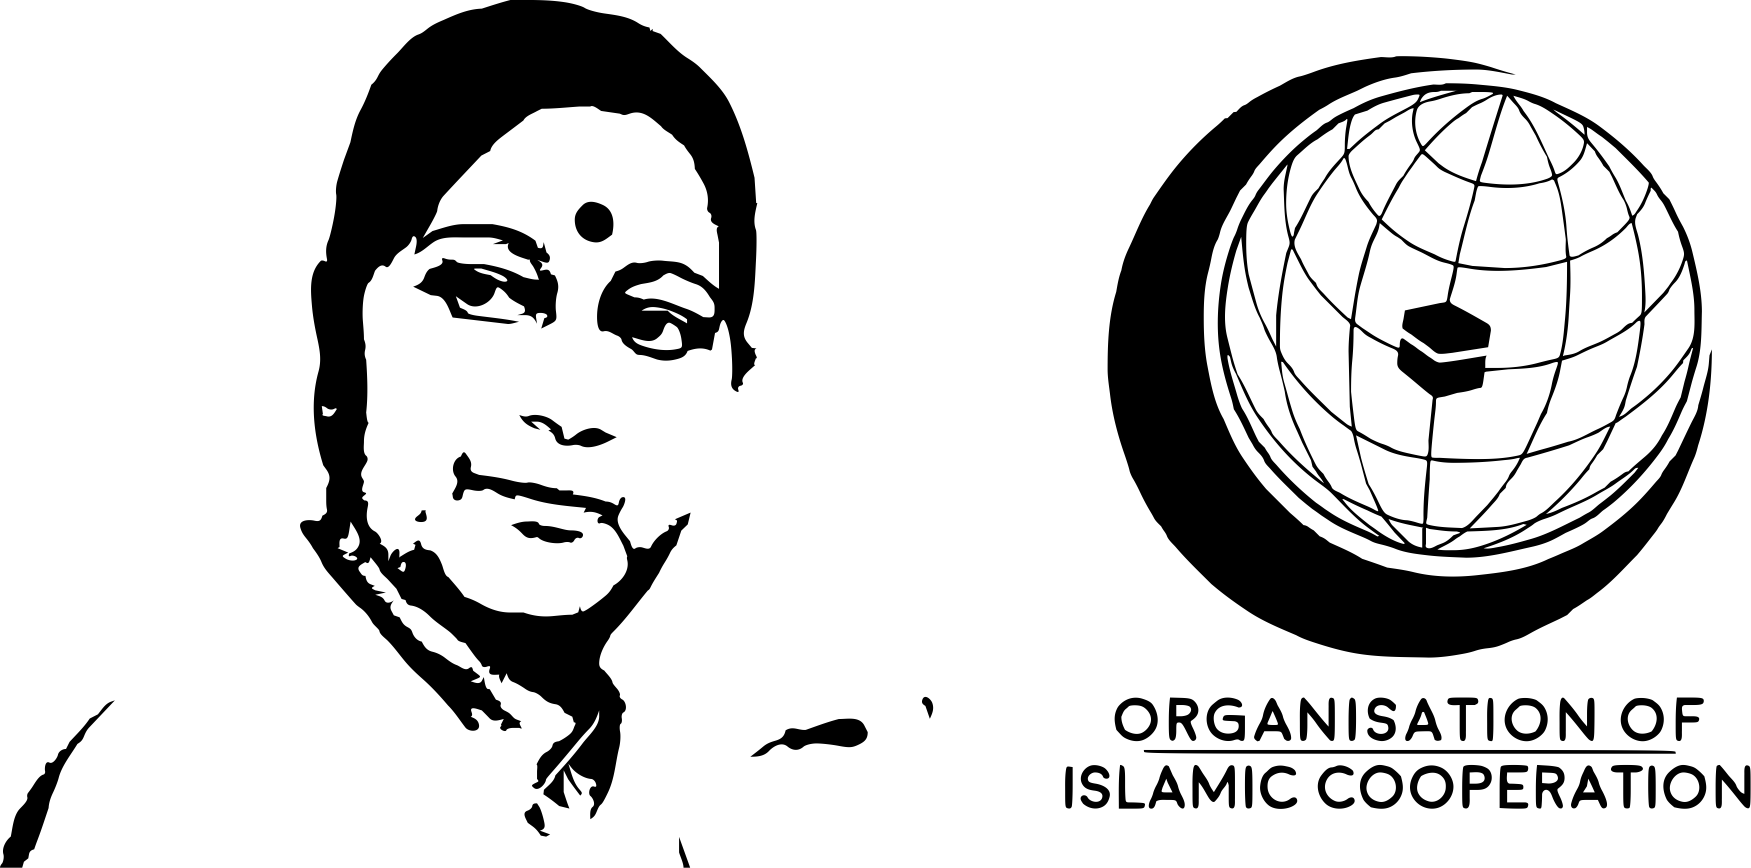 Another Diplomatic Coup by India – Sushama Swaraj invited as ‘Guest of Honor’ at OIC conclave, Pakistanis are Furious!